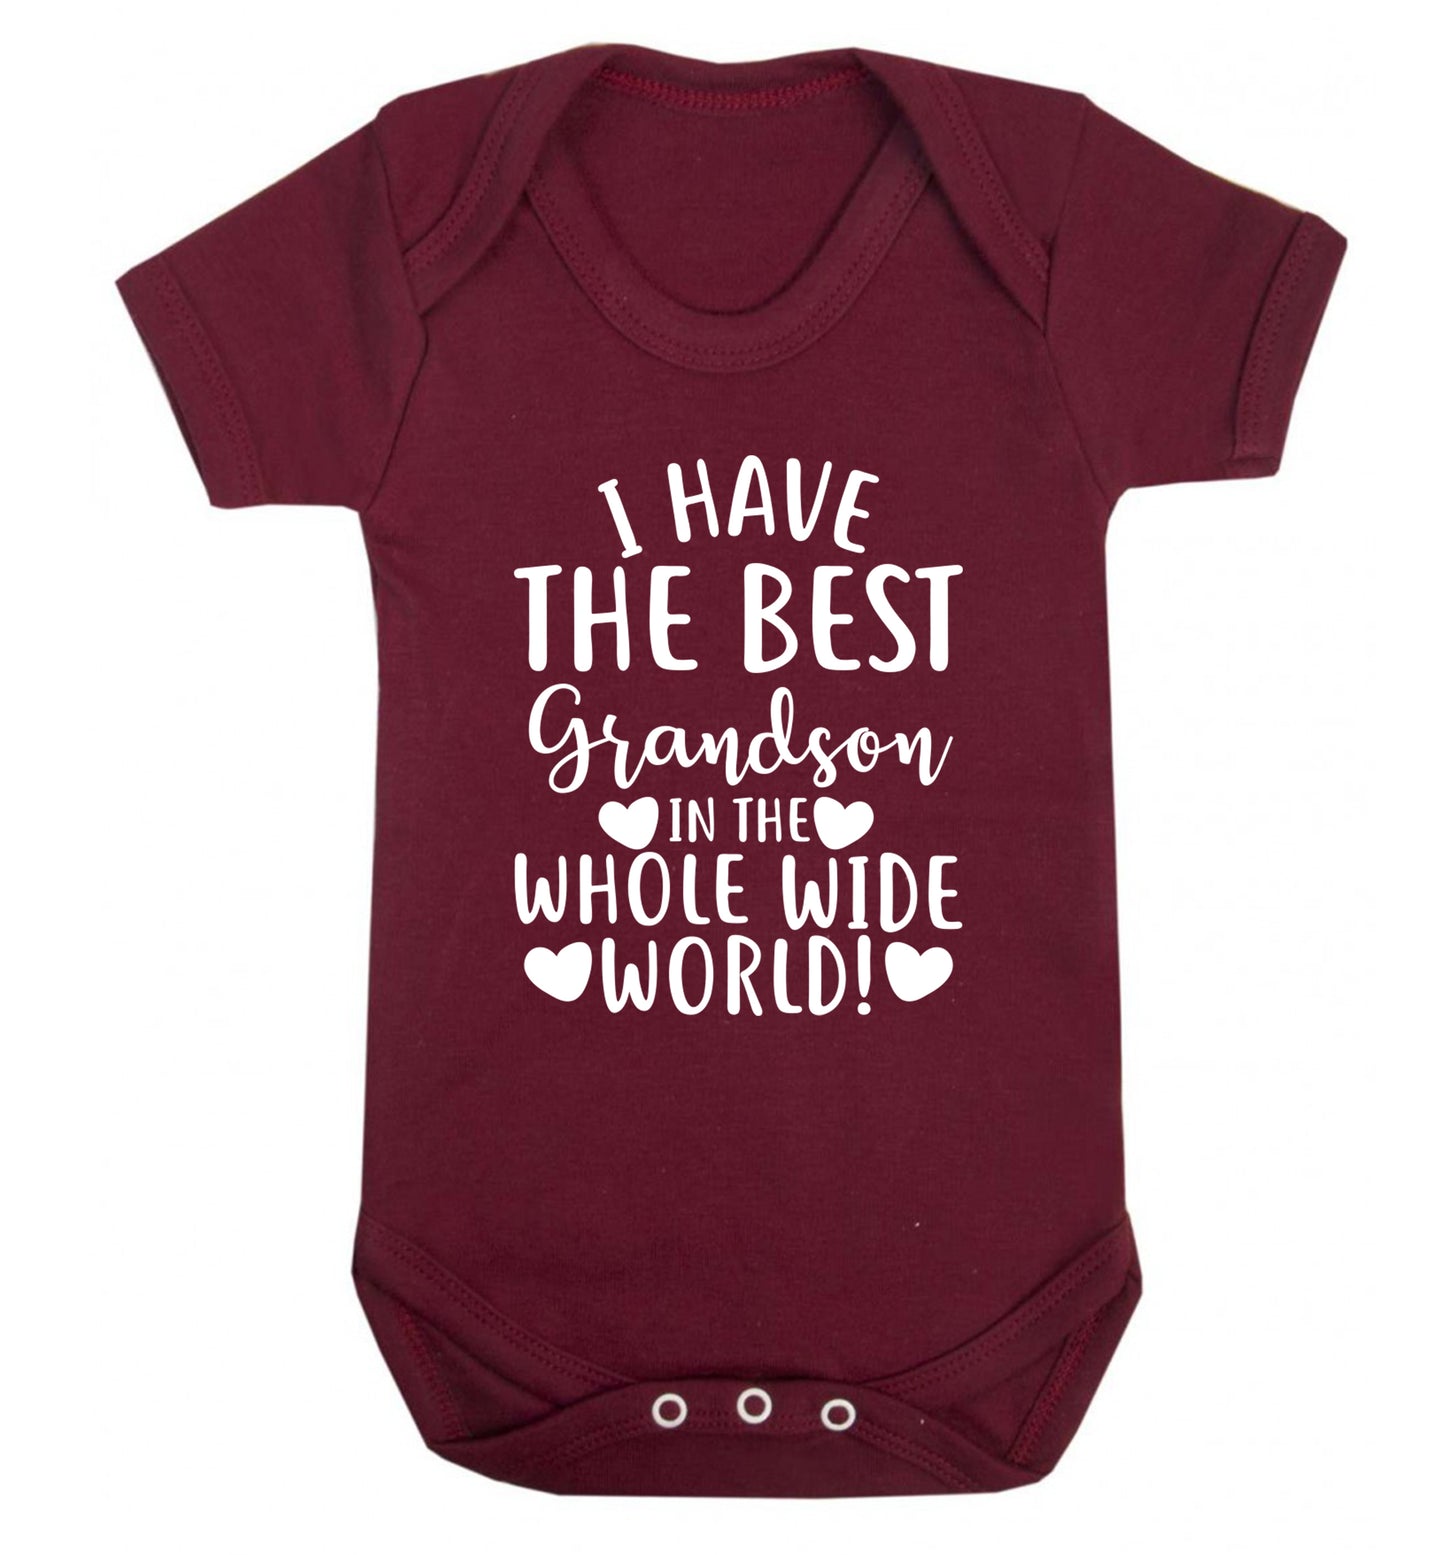 I have the best grandson in the whole wide world! Baby Vest maroon 18-24 months